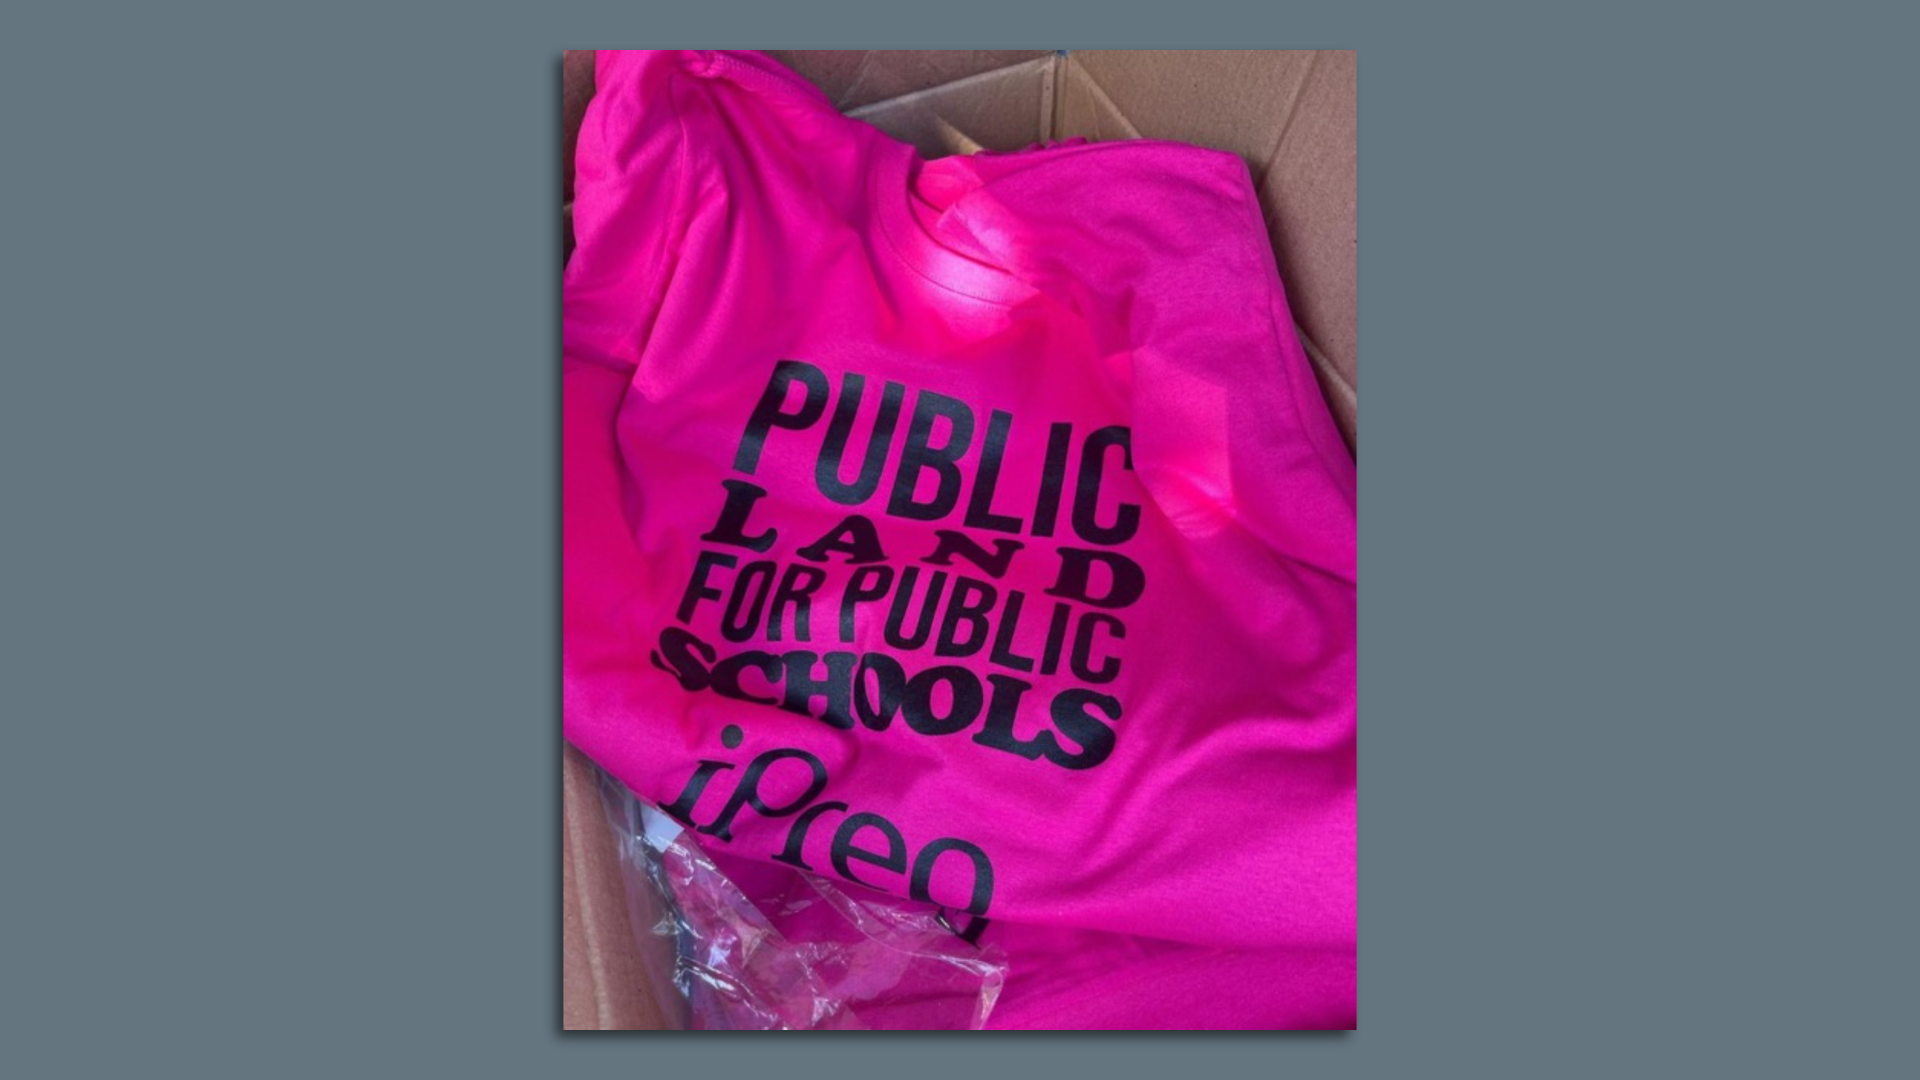 Hot pink shirts that have Public Land for Public Schools written across the front.